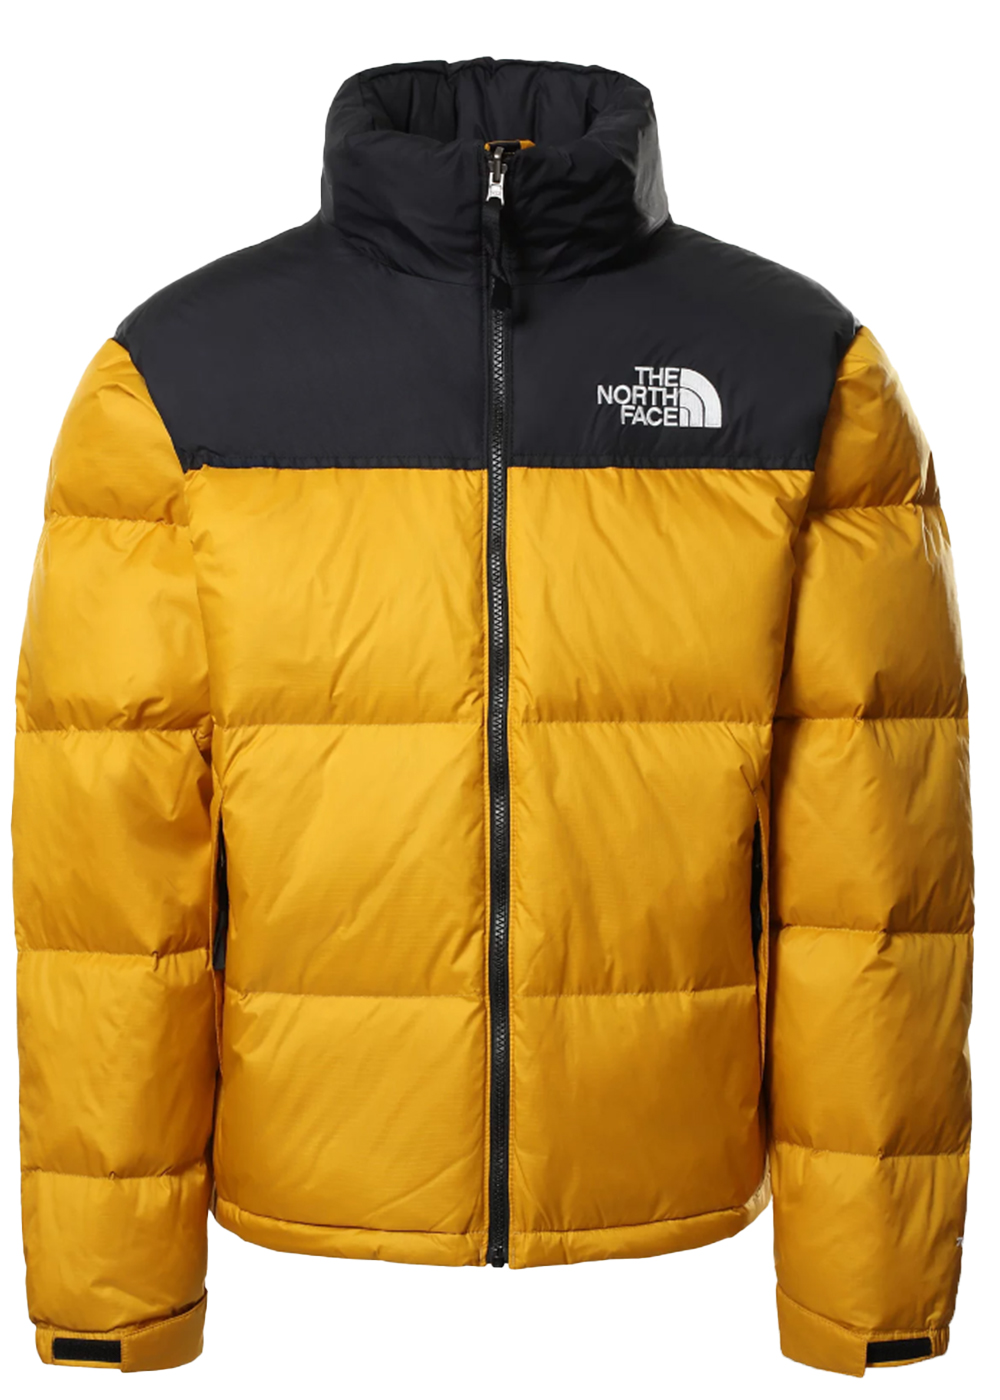 Buy & Sell The North Face Streetwear Apparel